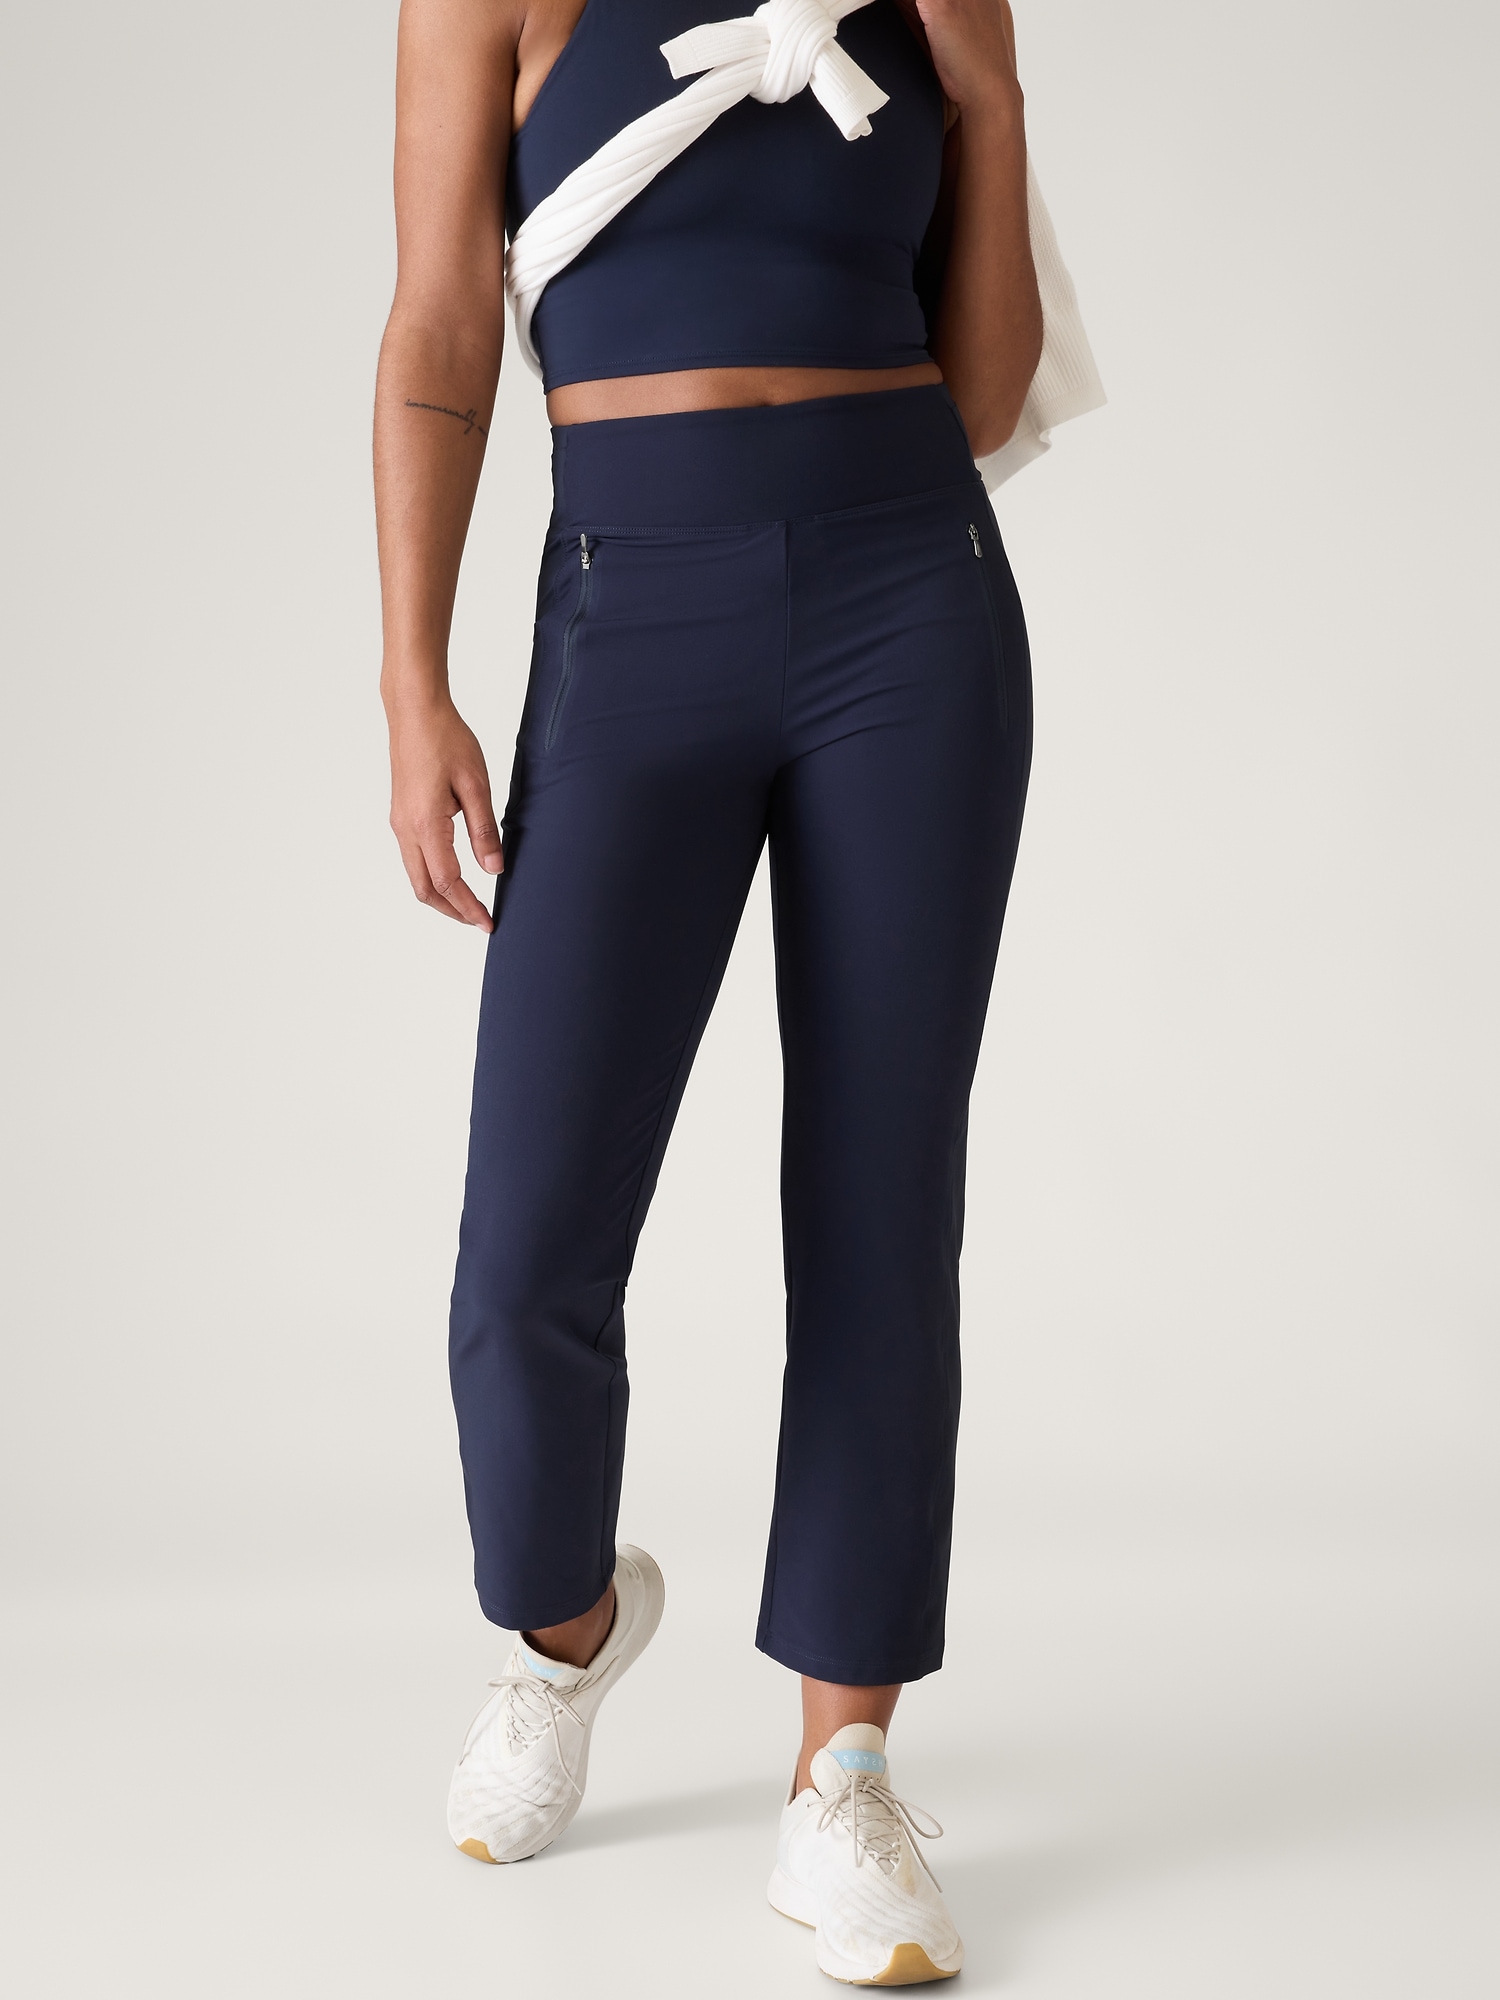 Lululemon Smooth Fit Pull-On High-Rise Cropped Pant. Utility Blue. Size 6.